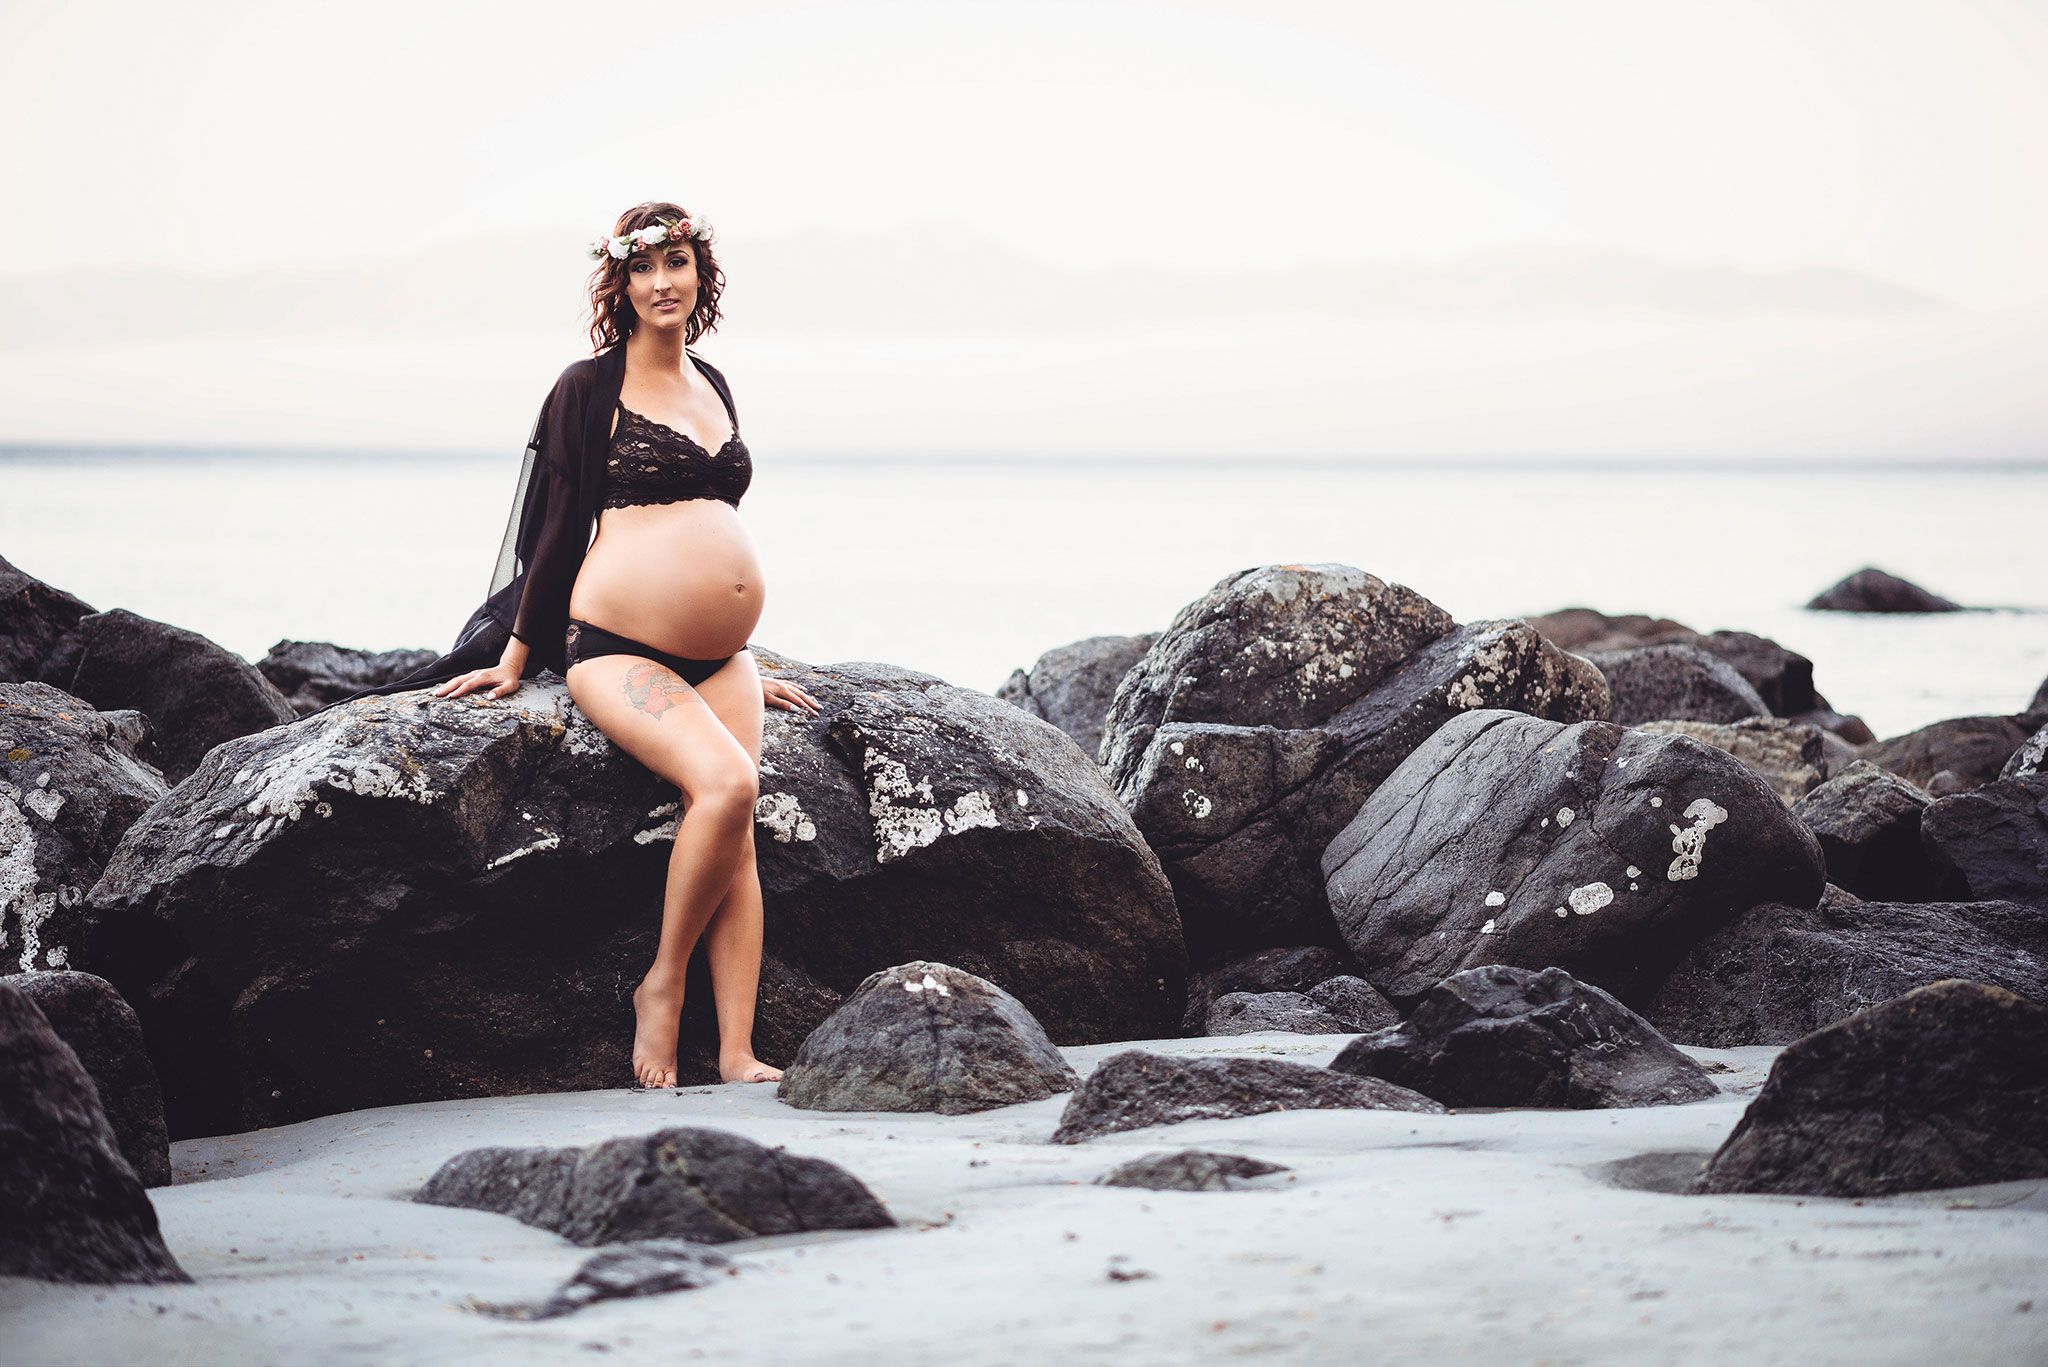 Maternity photography in black lingerie and flower crown at East Sooke Park beach near Victoria.